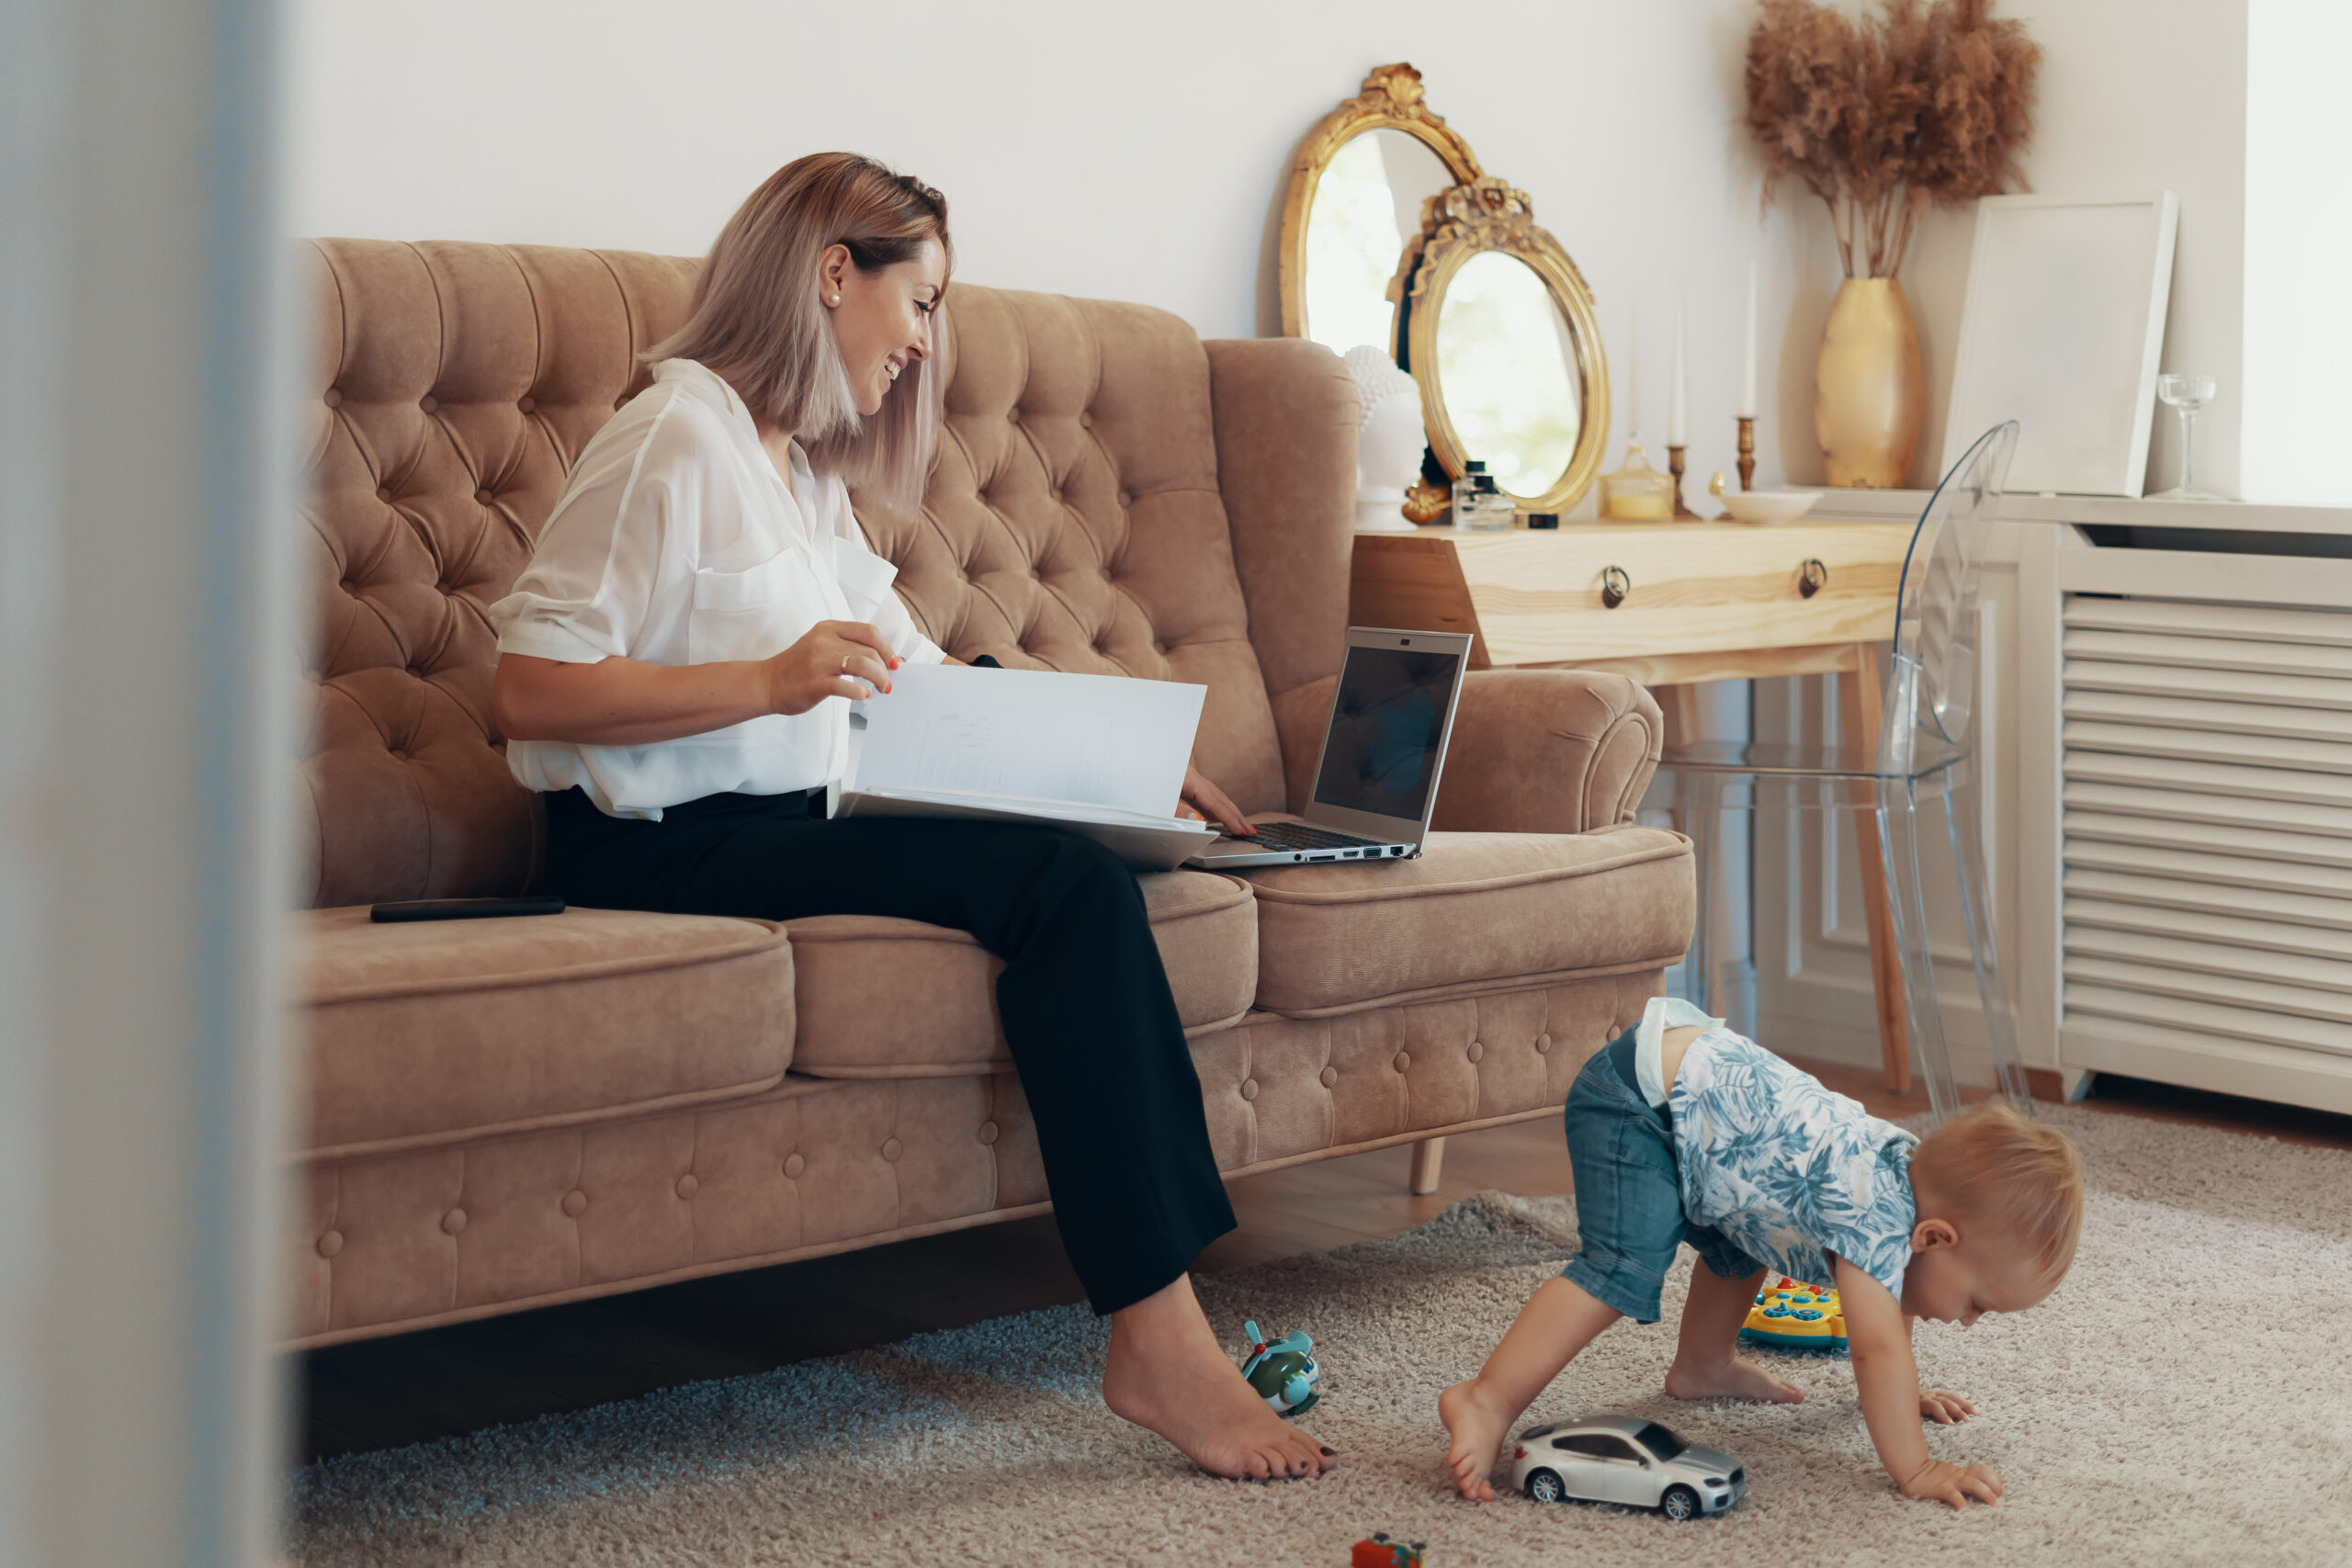 Beautiful business woman working at home. Multi-tasking, freelance and motherhood concept. Working mother career